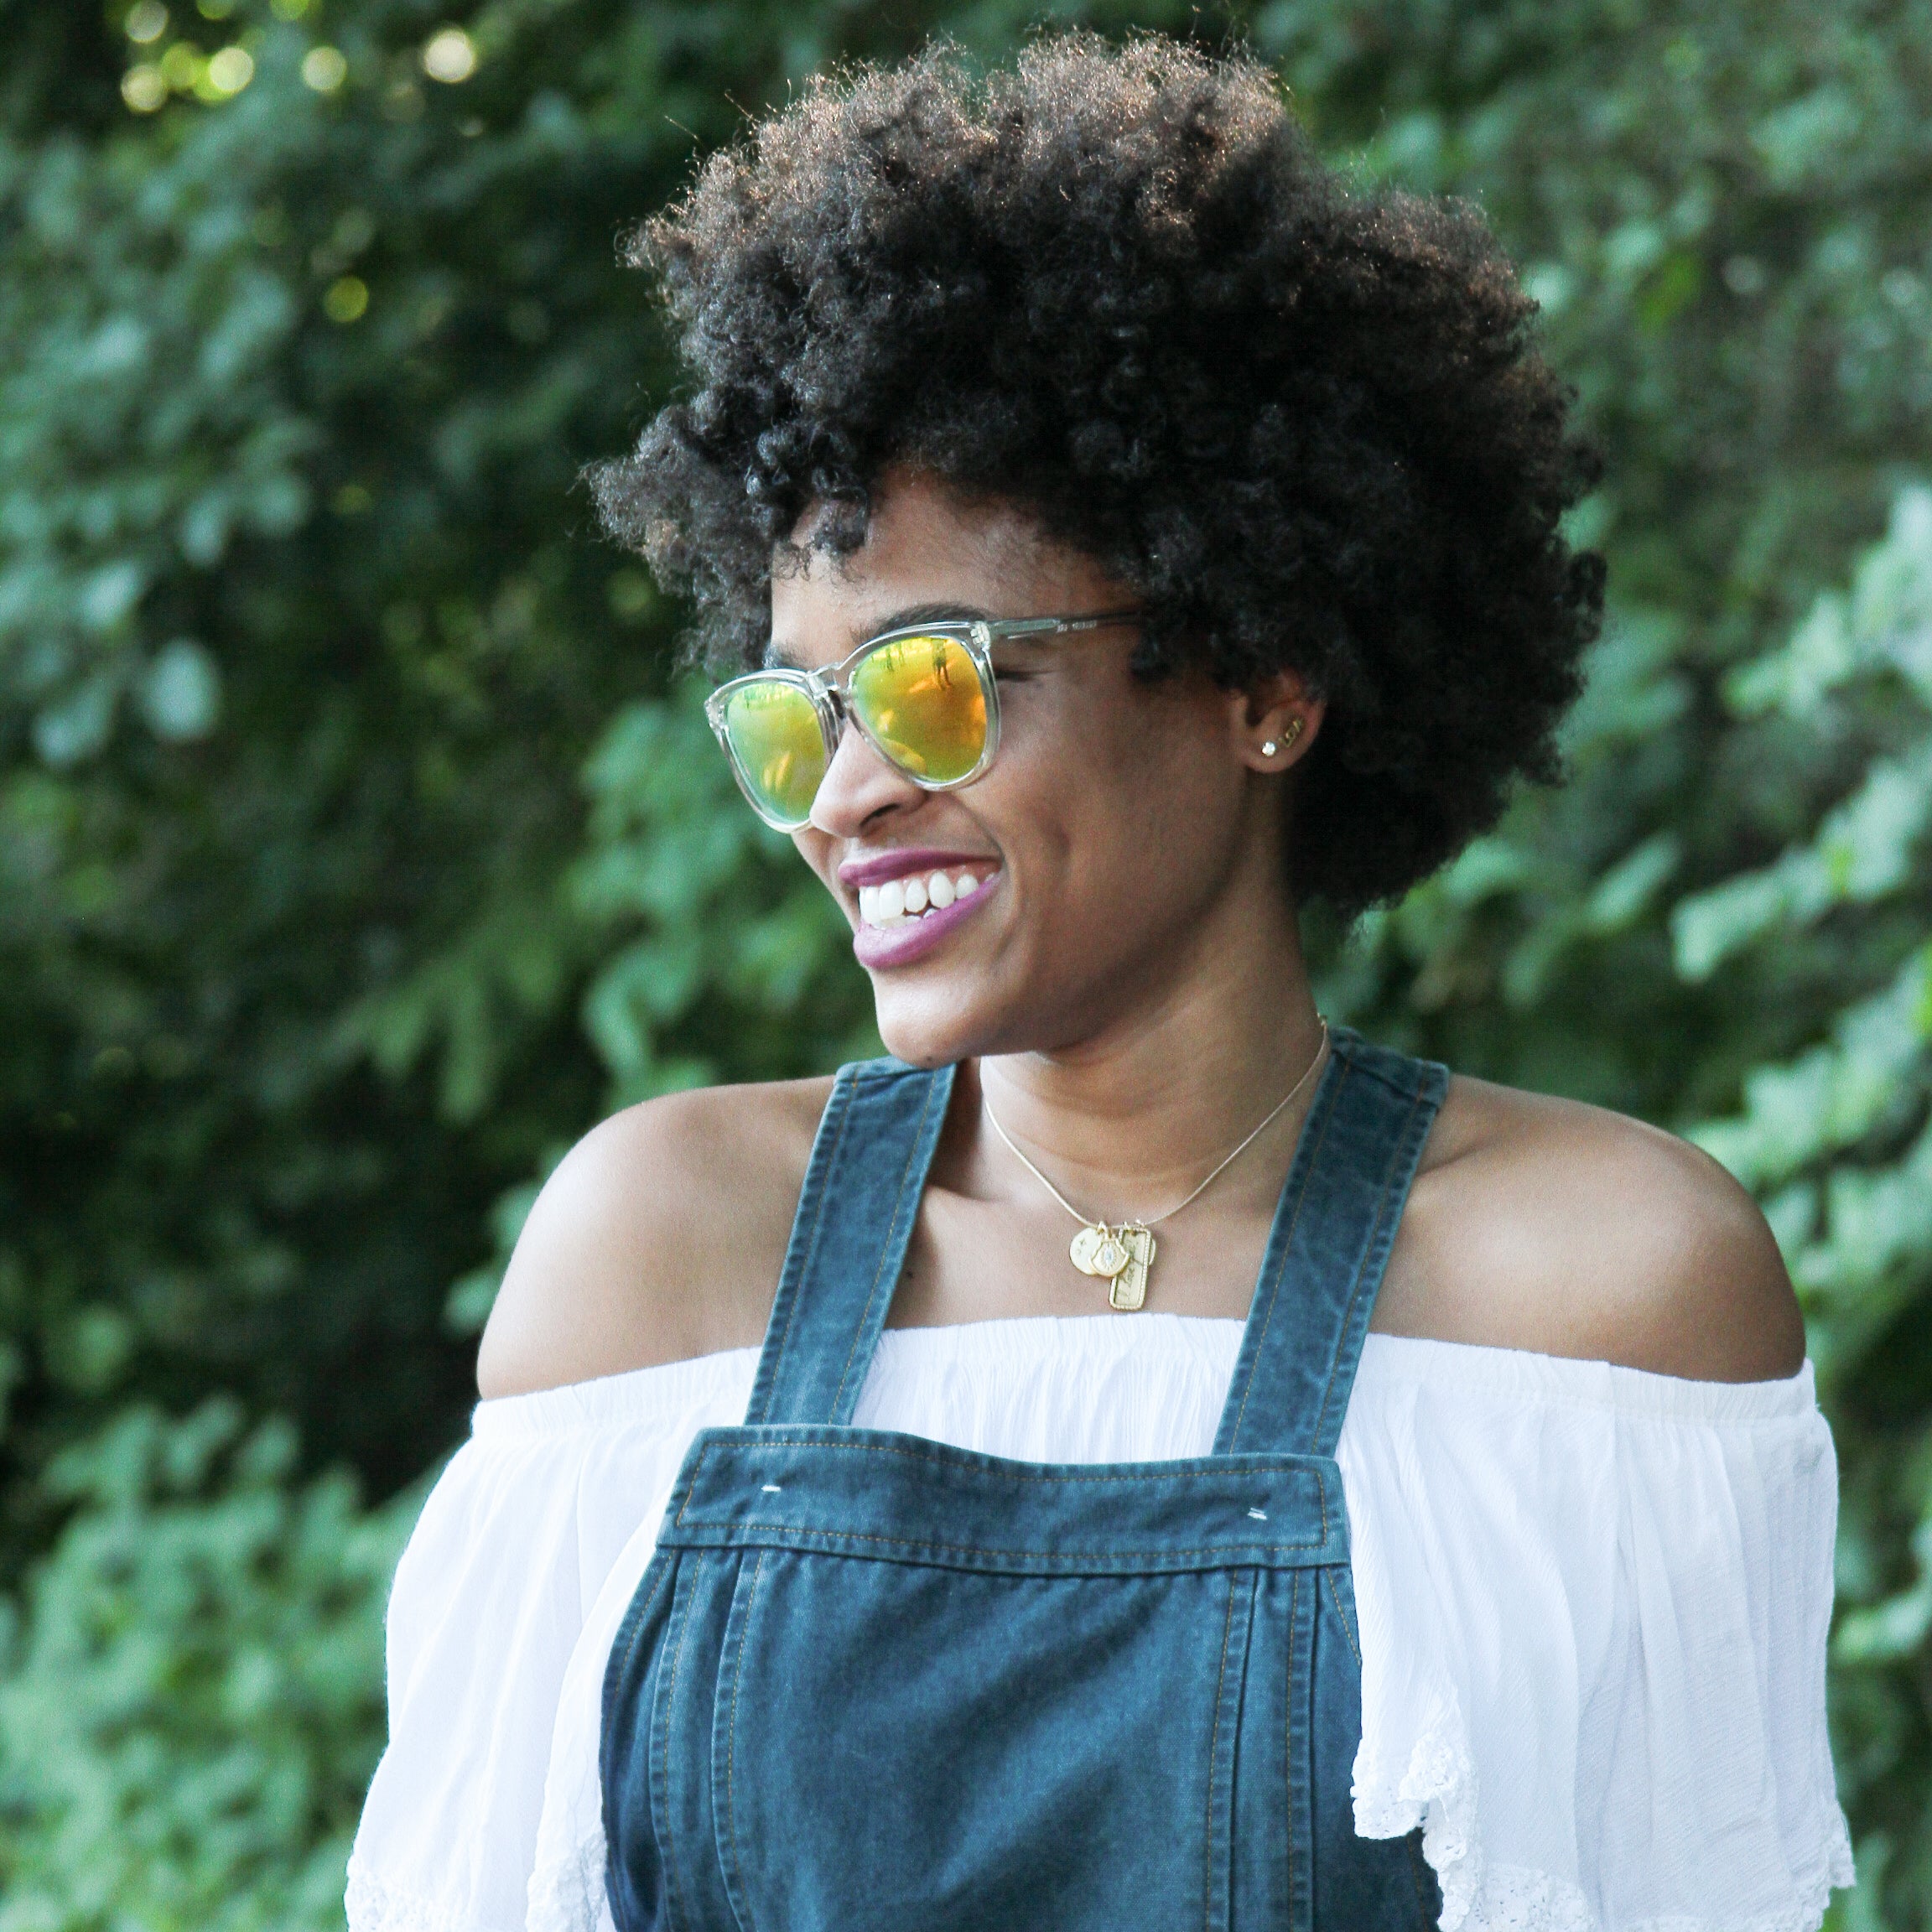 Check out all the Natural Hair Beauties at CURLFEST 2016
